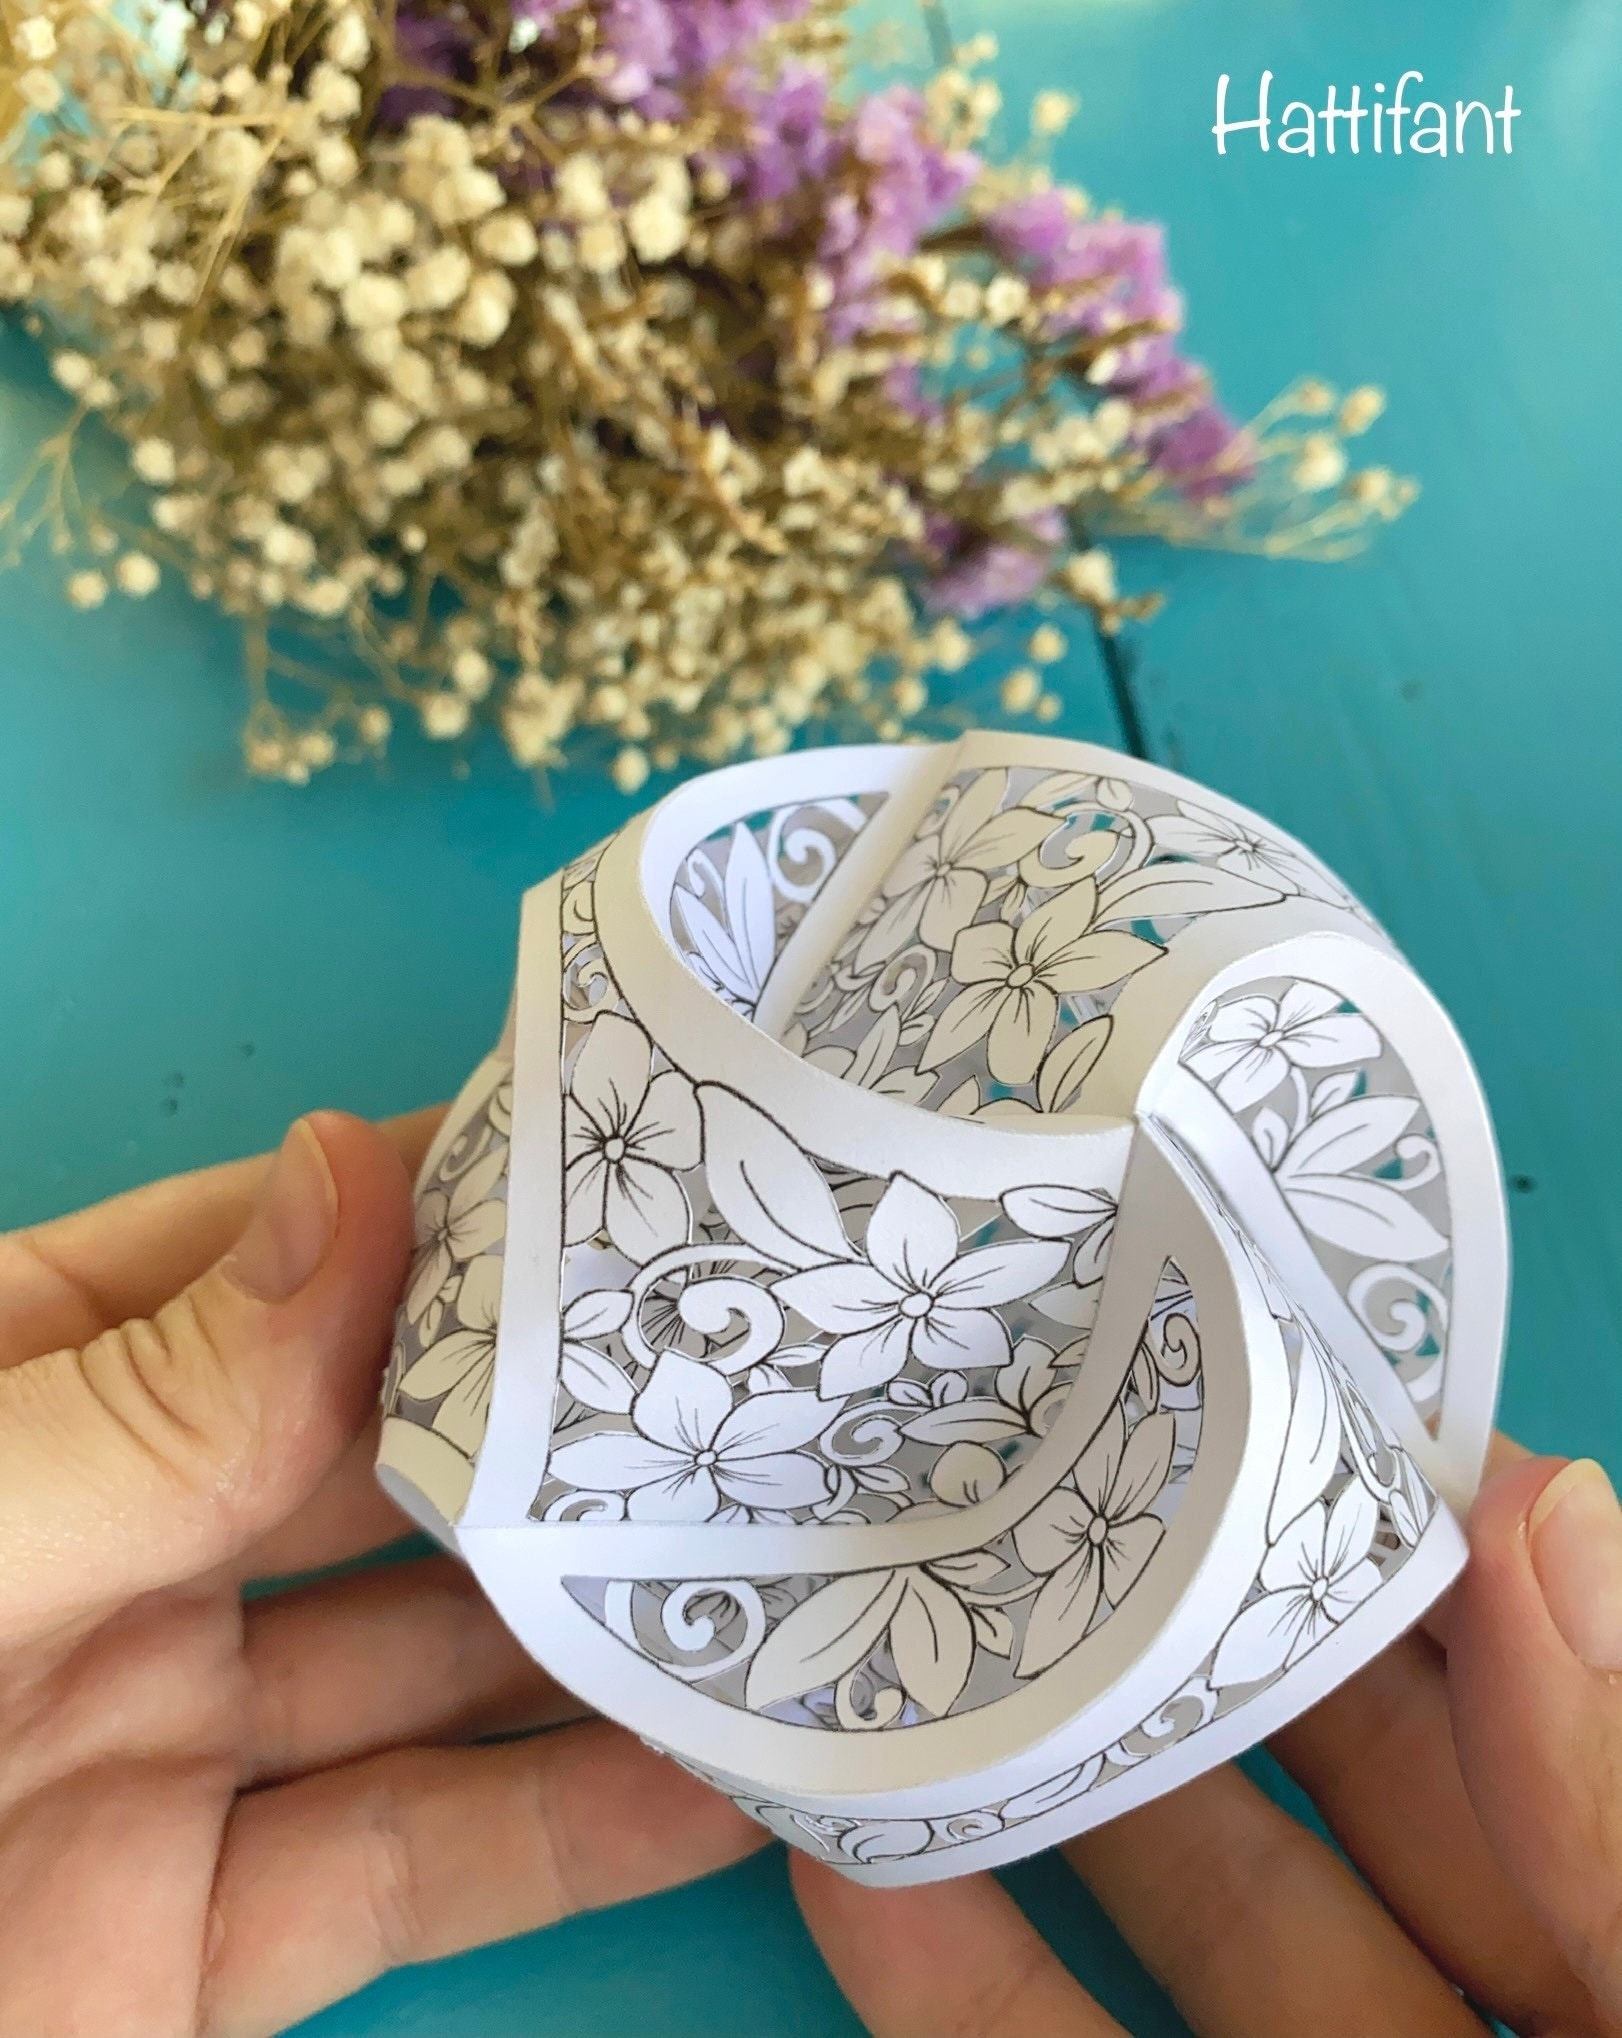 Triskele paper globe papercut by hand floral pattern personal license